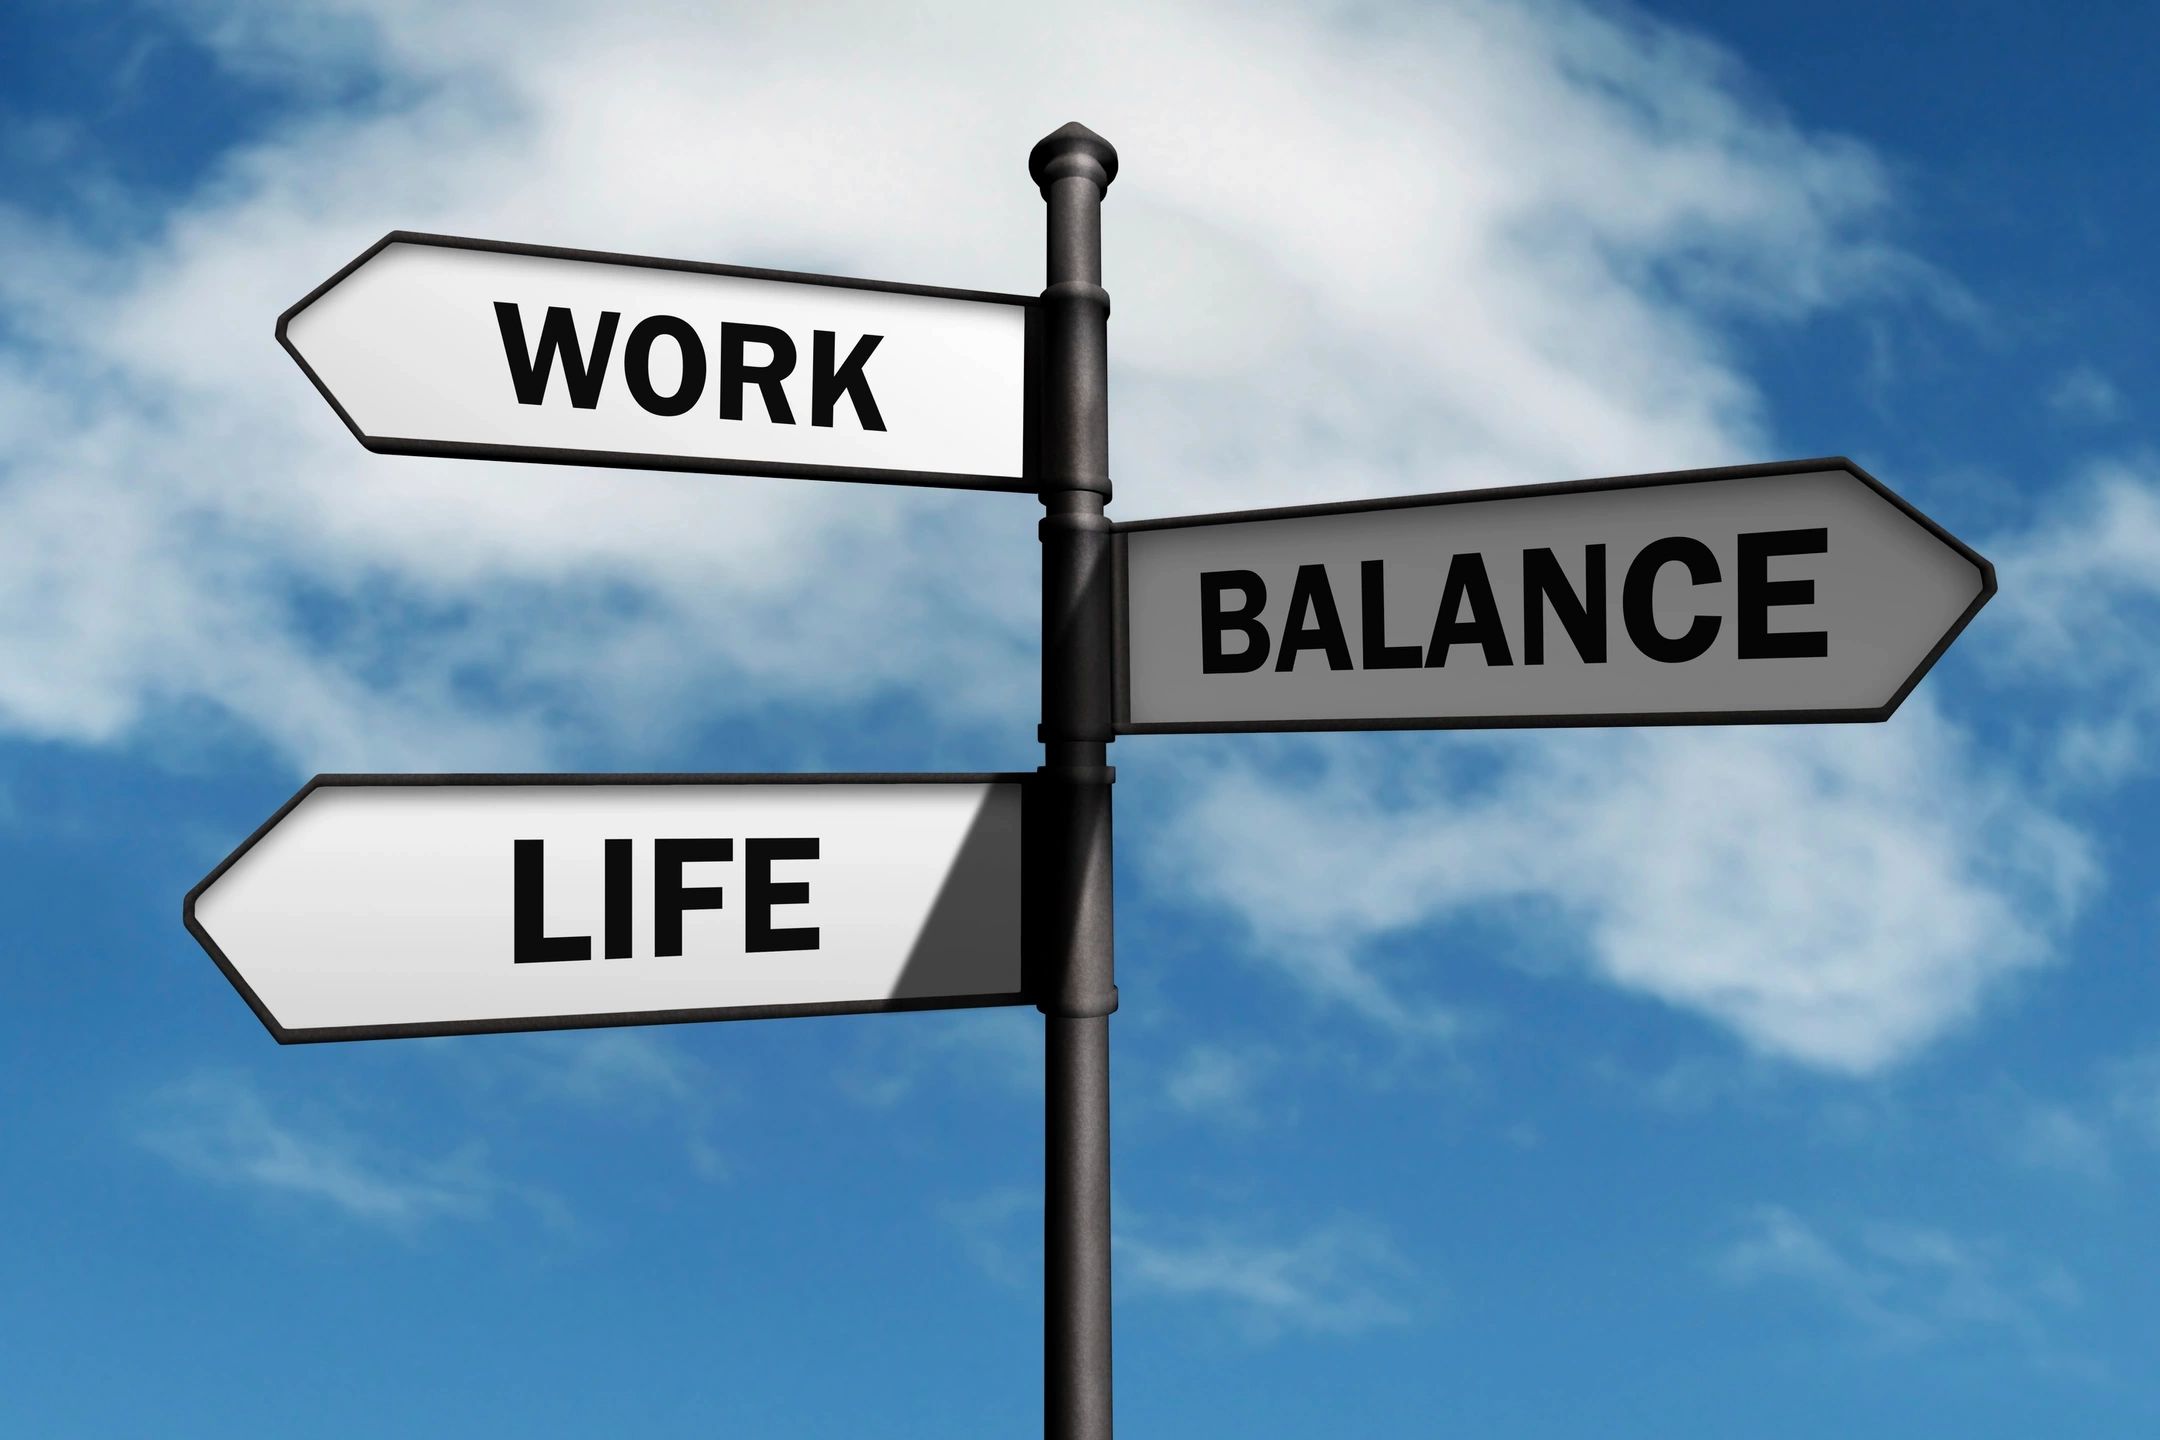 Sign post with three one-word signs pointing in different directions: "Work", "Life", and "Balance".